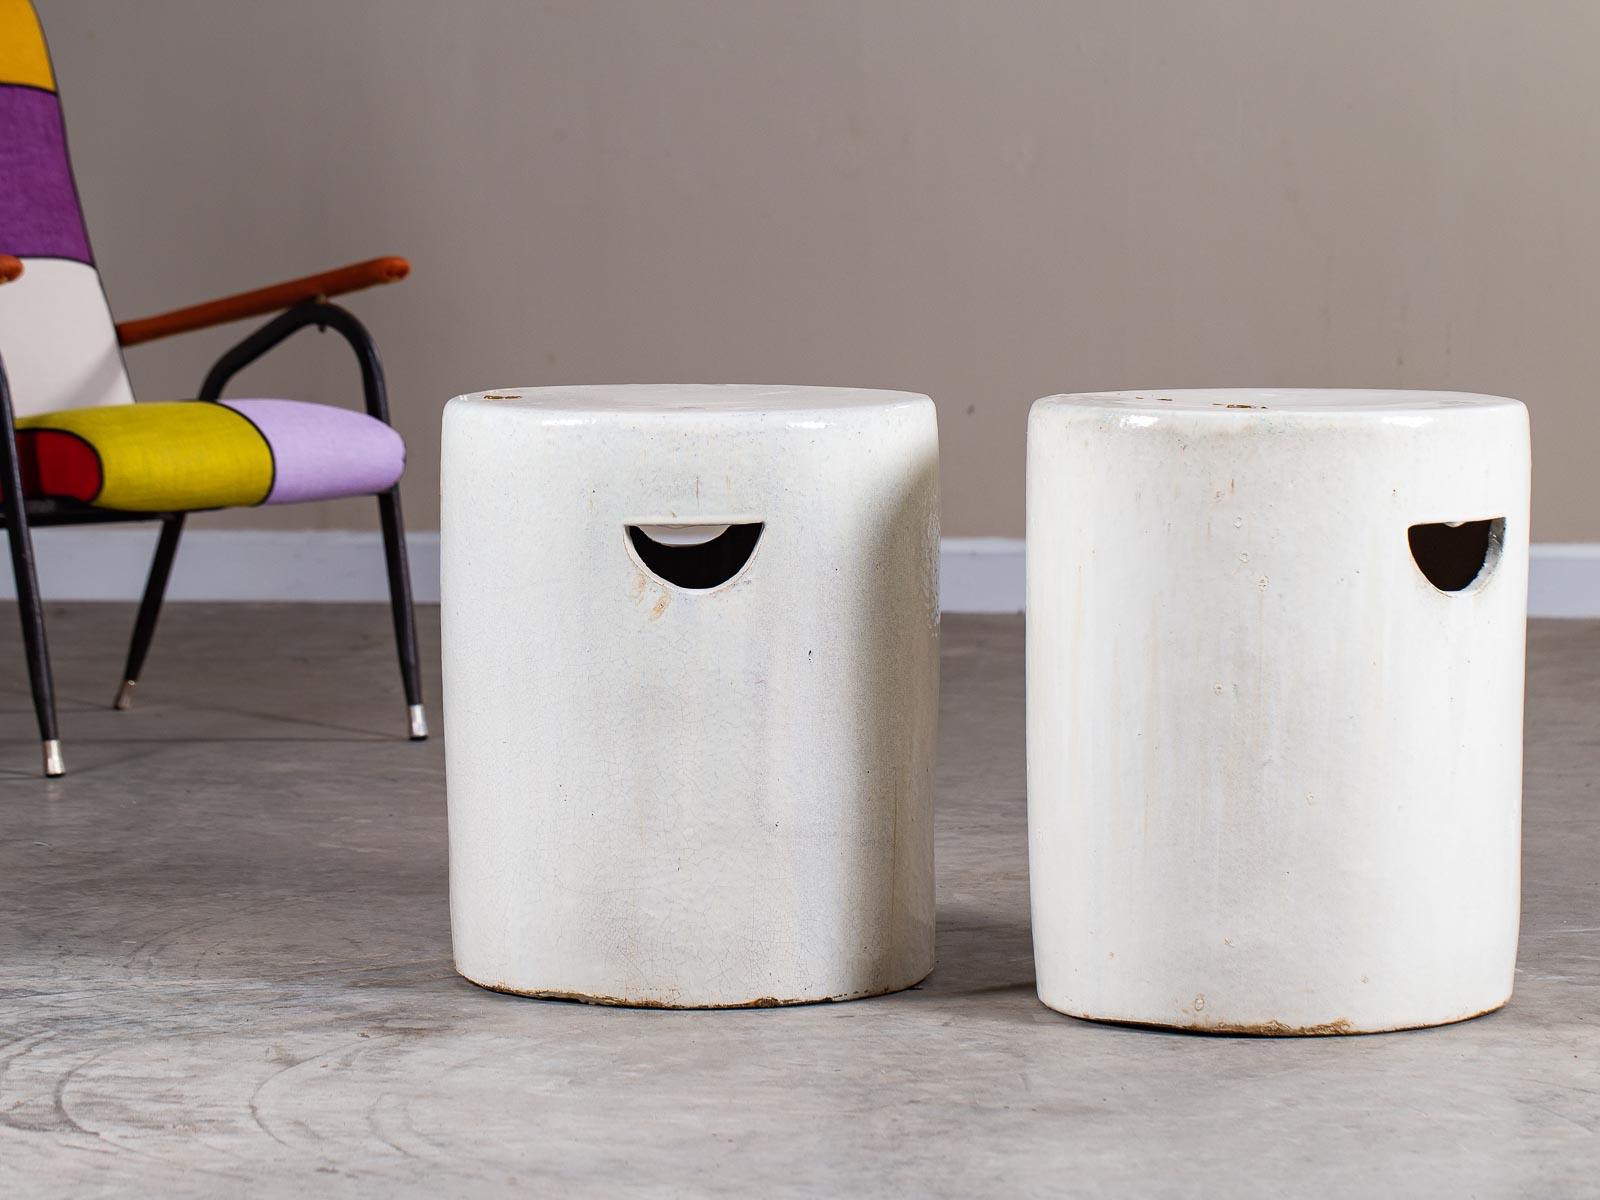 This pair of modern handmade ceramic garden seats or stools each have a handsome contemporary profile with straight cylindrical sides and a circular top. Crafted completely by hand each garden seat stool bears the mark of individual creation. Please